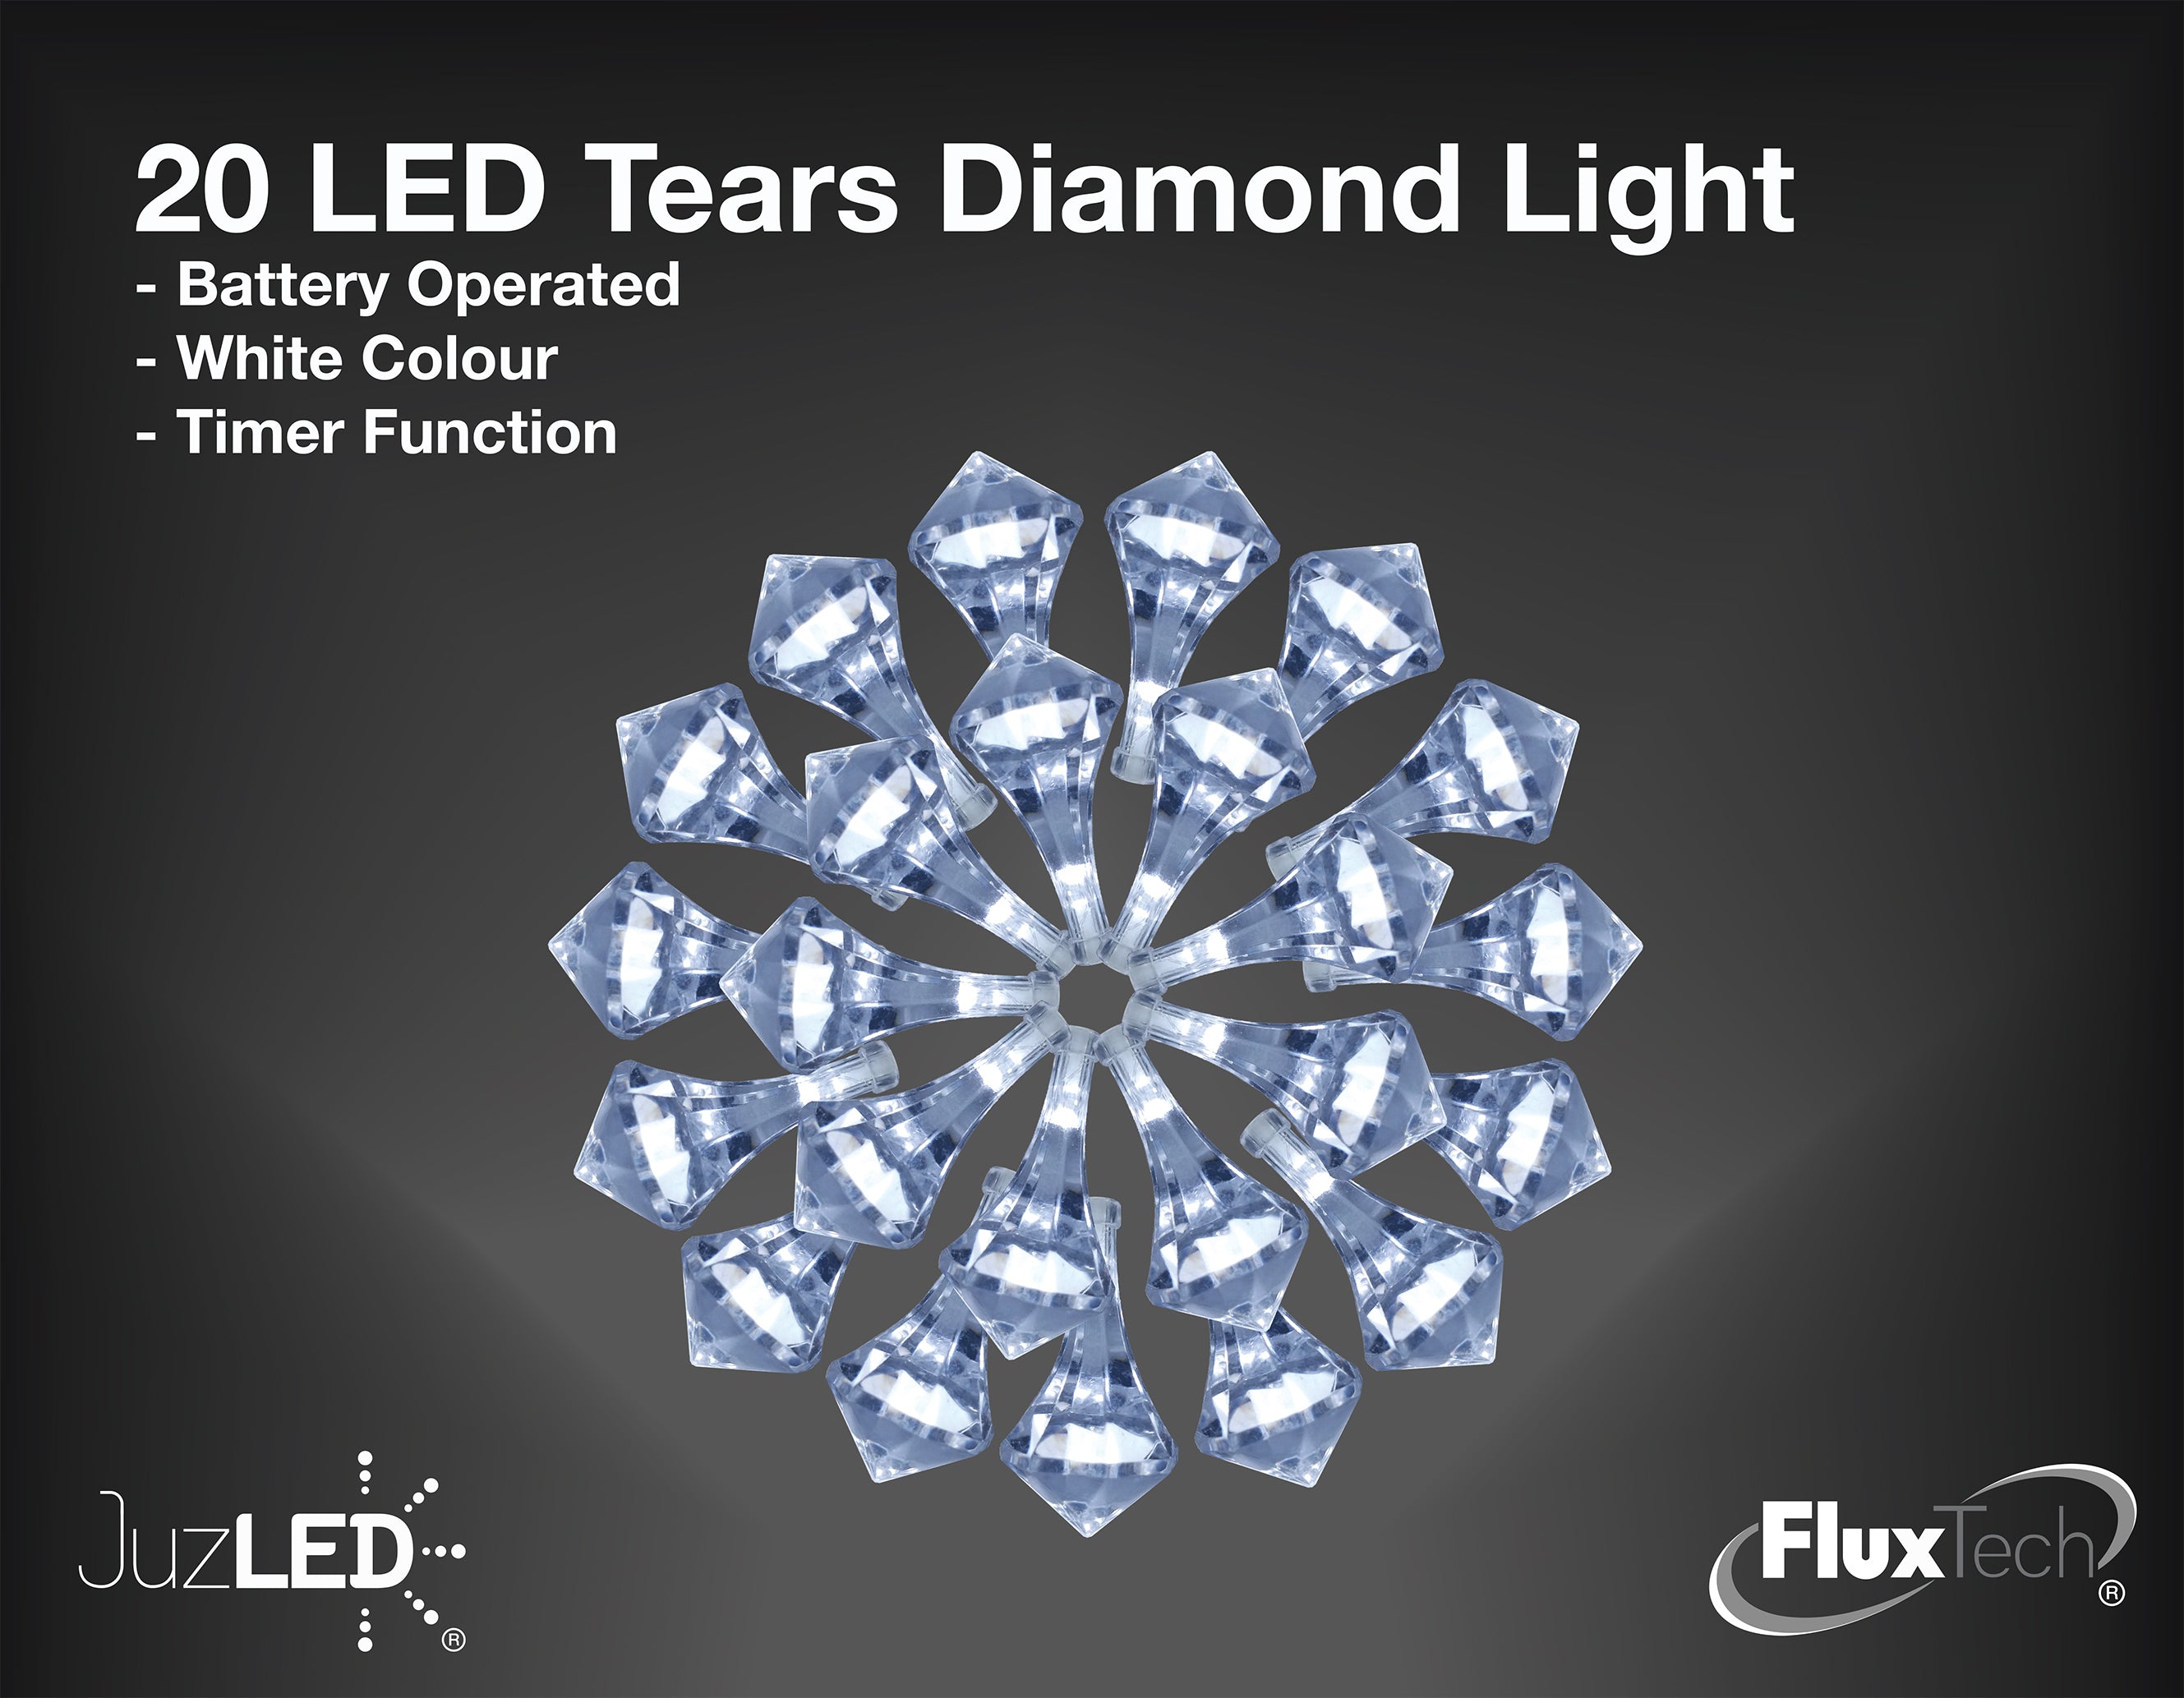 FluxTech - Tears Diamond x 20 Cool White LED Lights by JustLED – Timer function - Battery Operated